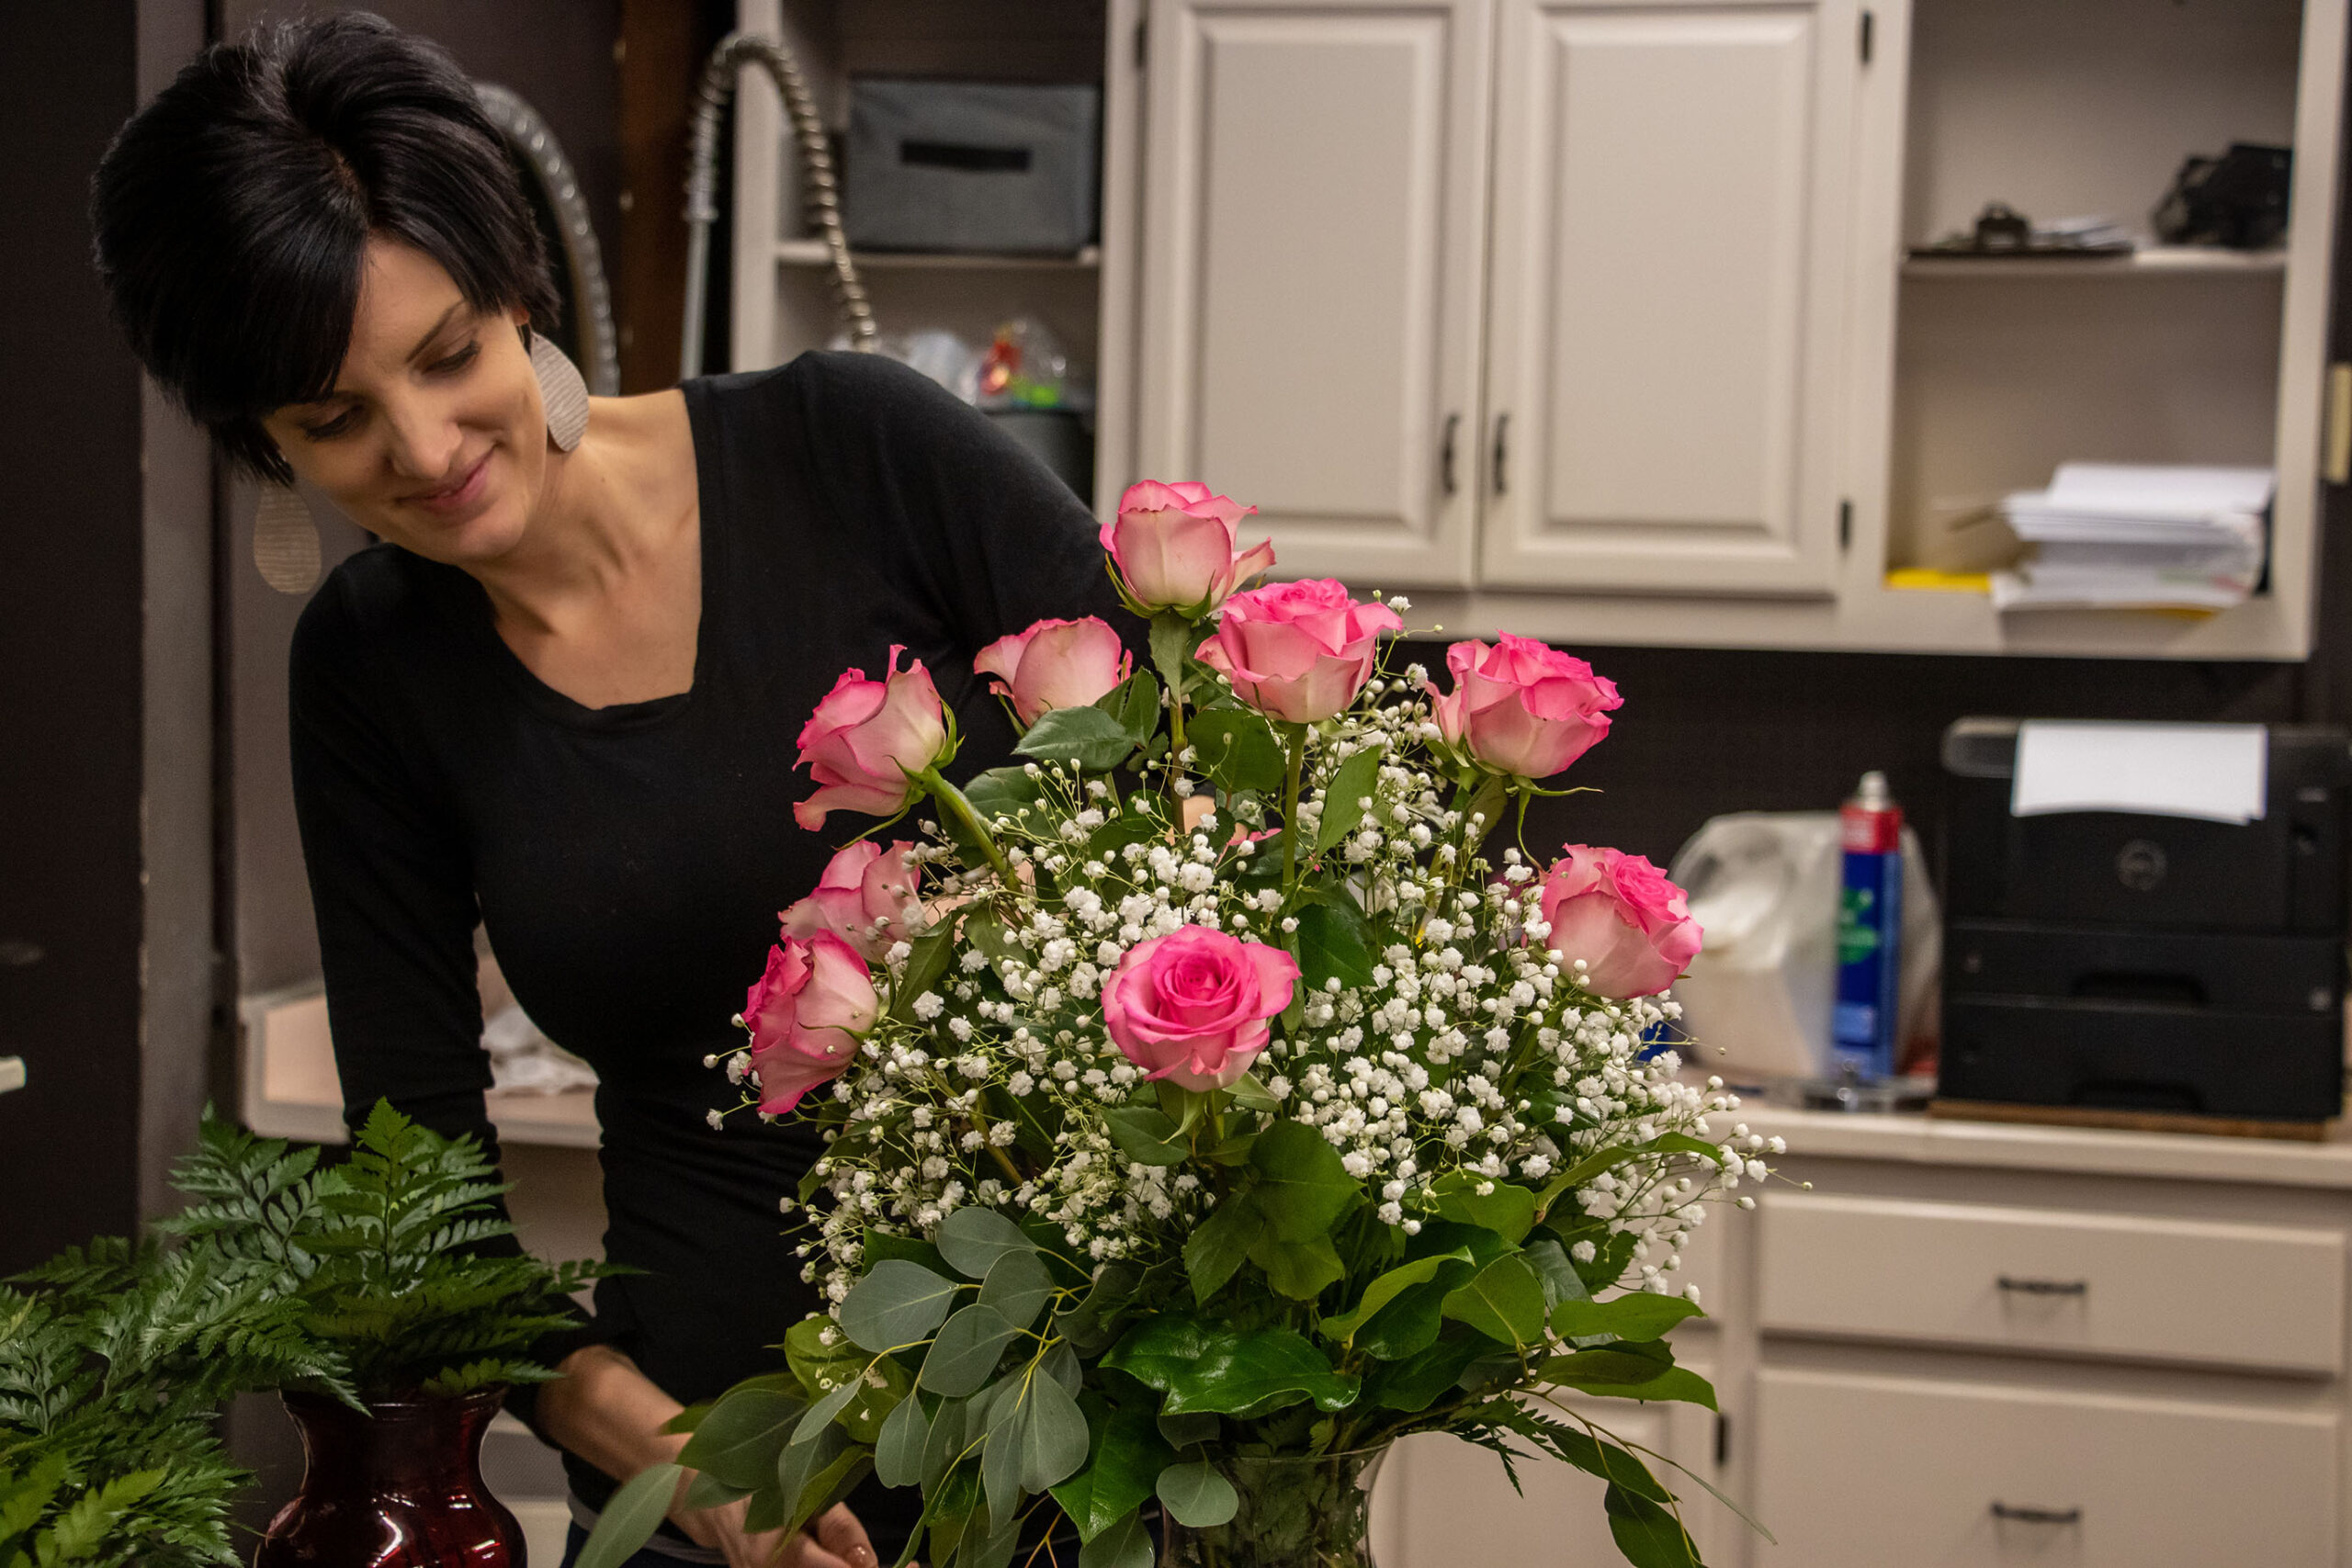 “The most to do in the shortest time—” Willson Florist prepares for Valentine’s Day